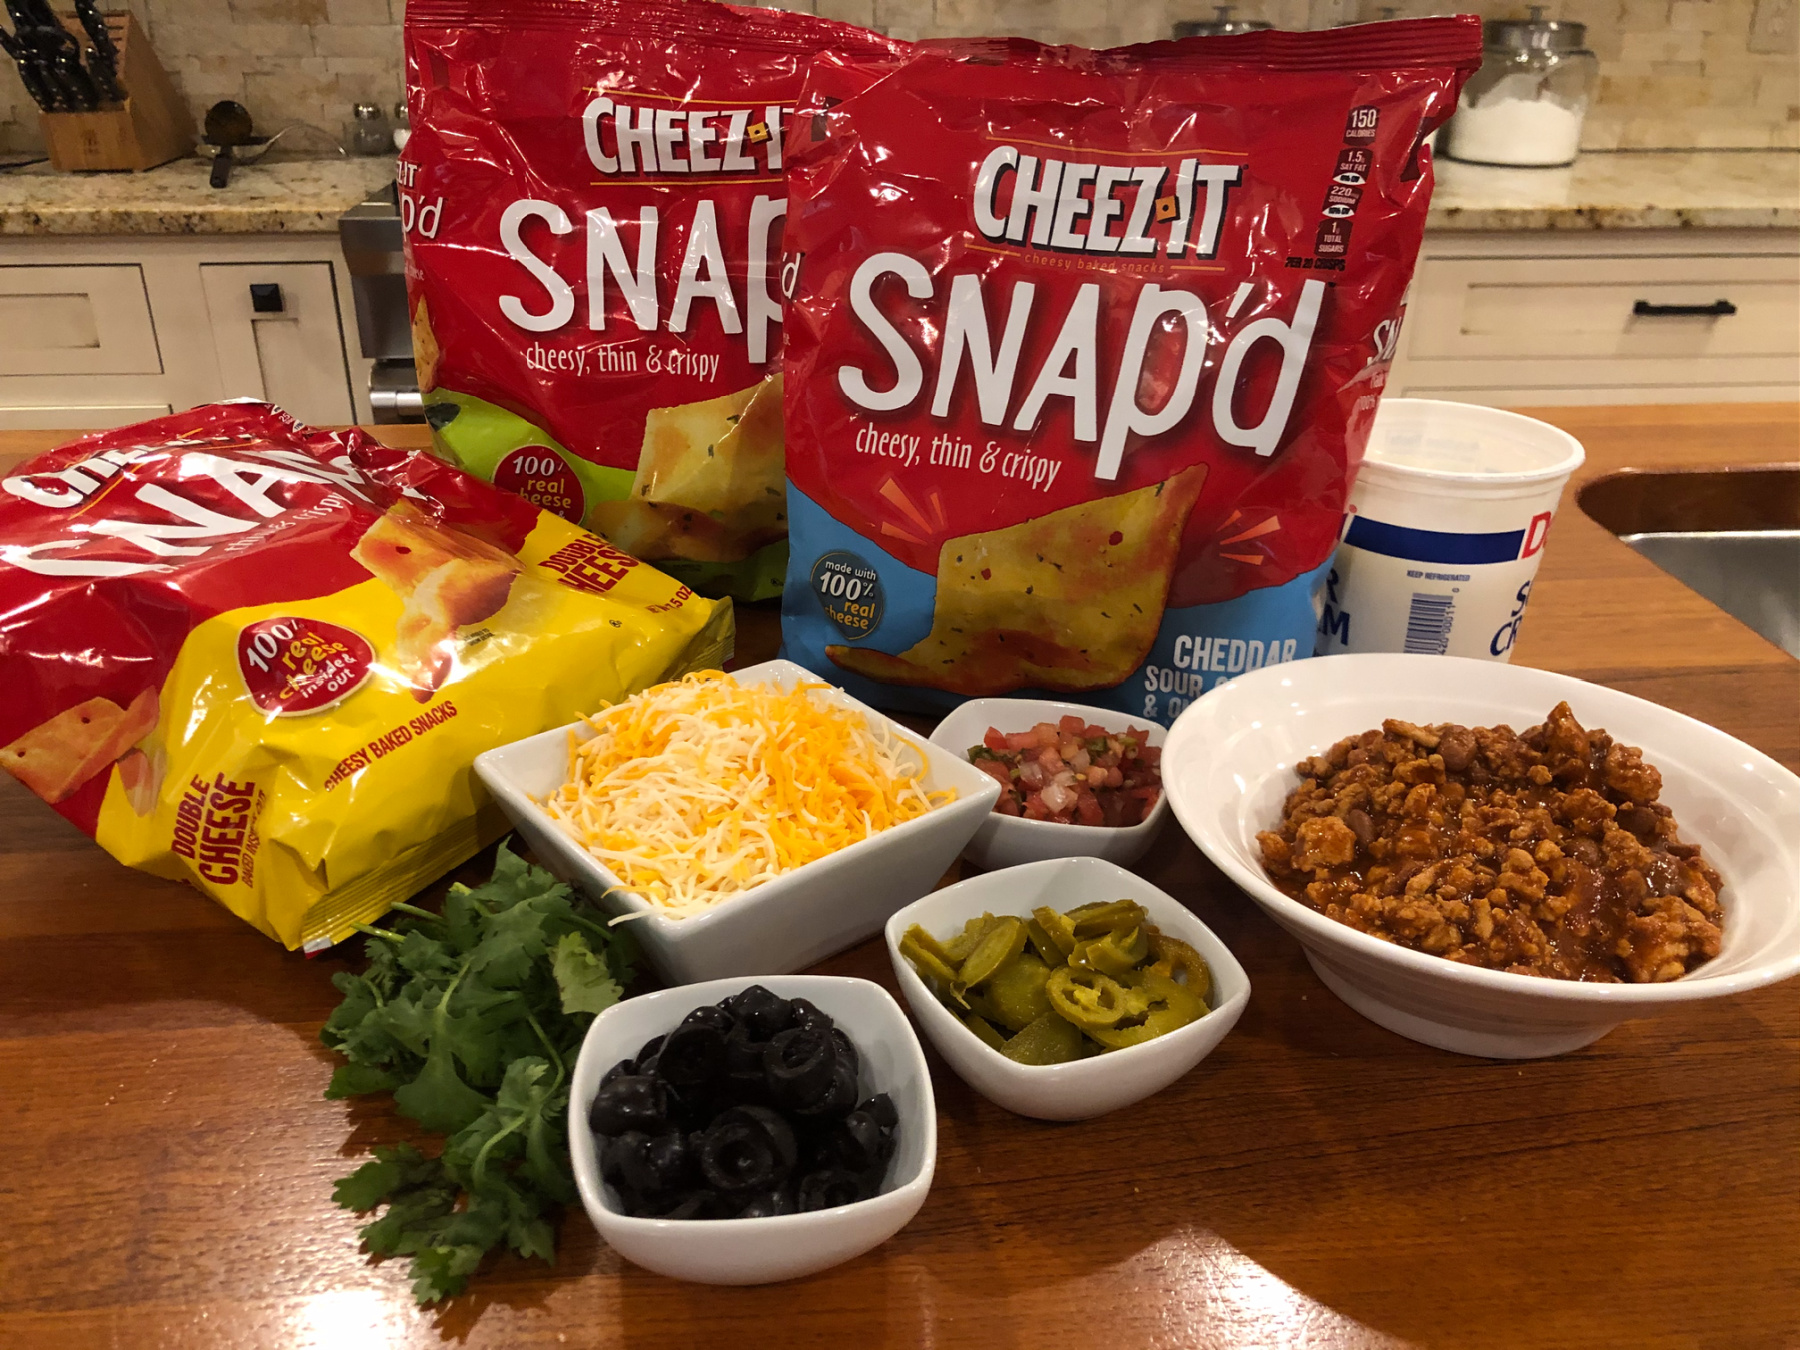 Snap'd Nachos Are The Perfect Game Day Snack! on I Heart Publix